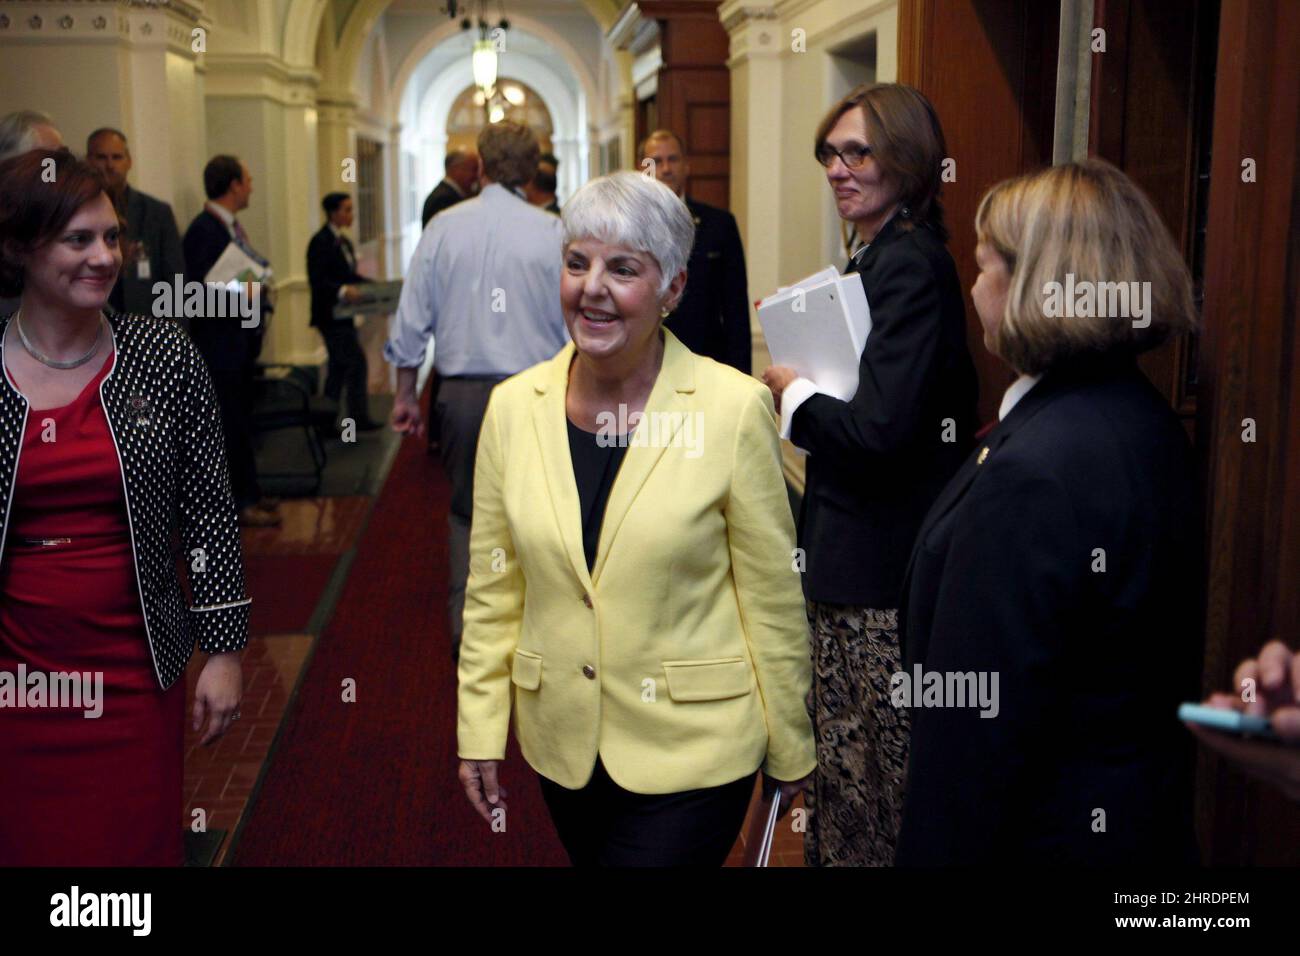 B.C. Finance Minister Carole James leaves the legislative assembly after delivering the budget from the legislative assembly at Legislature in Victoria, B.C., on Monday, September 11, 2017. A decades-old sore spot in the Canadian federation is days away from another flare-up as the country's finance ministers prepare to discuss potential tweaks to the formula behind equalization payments. THE CANADIAN PRESS/Chad Hipolito Stock Photo